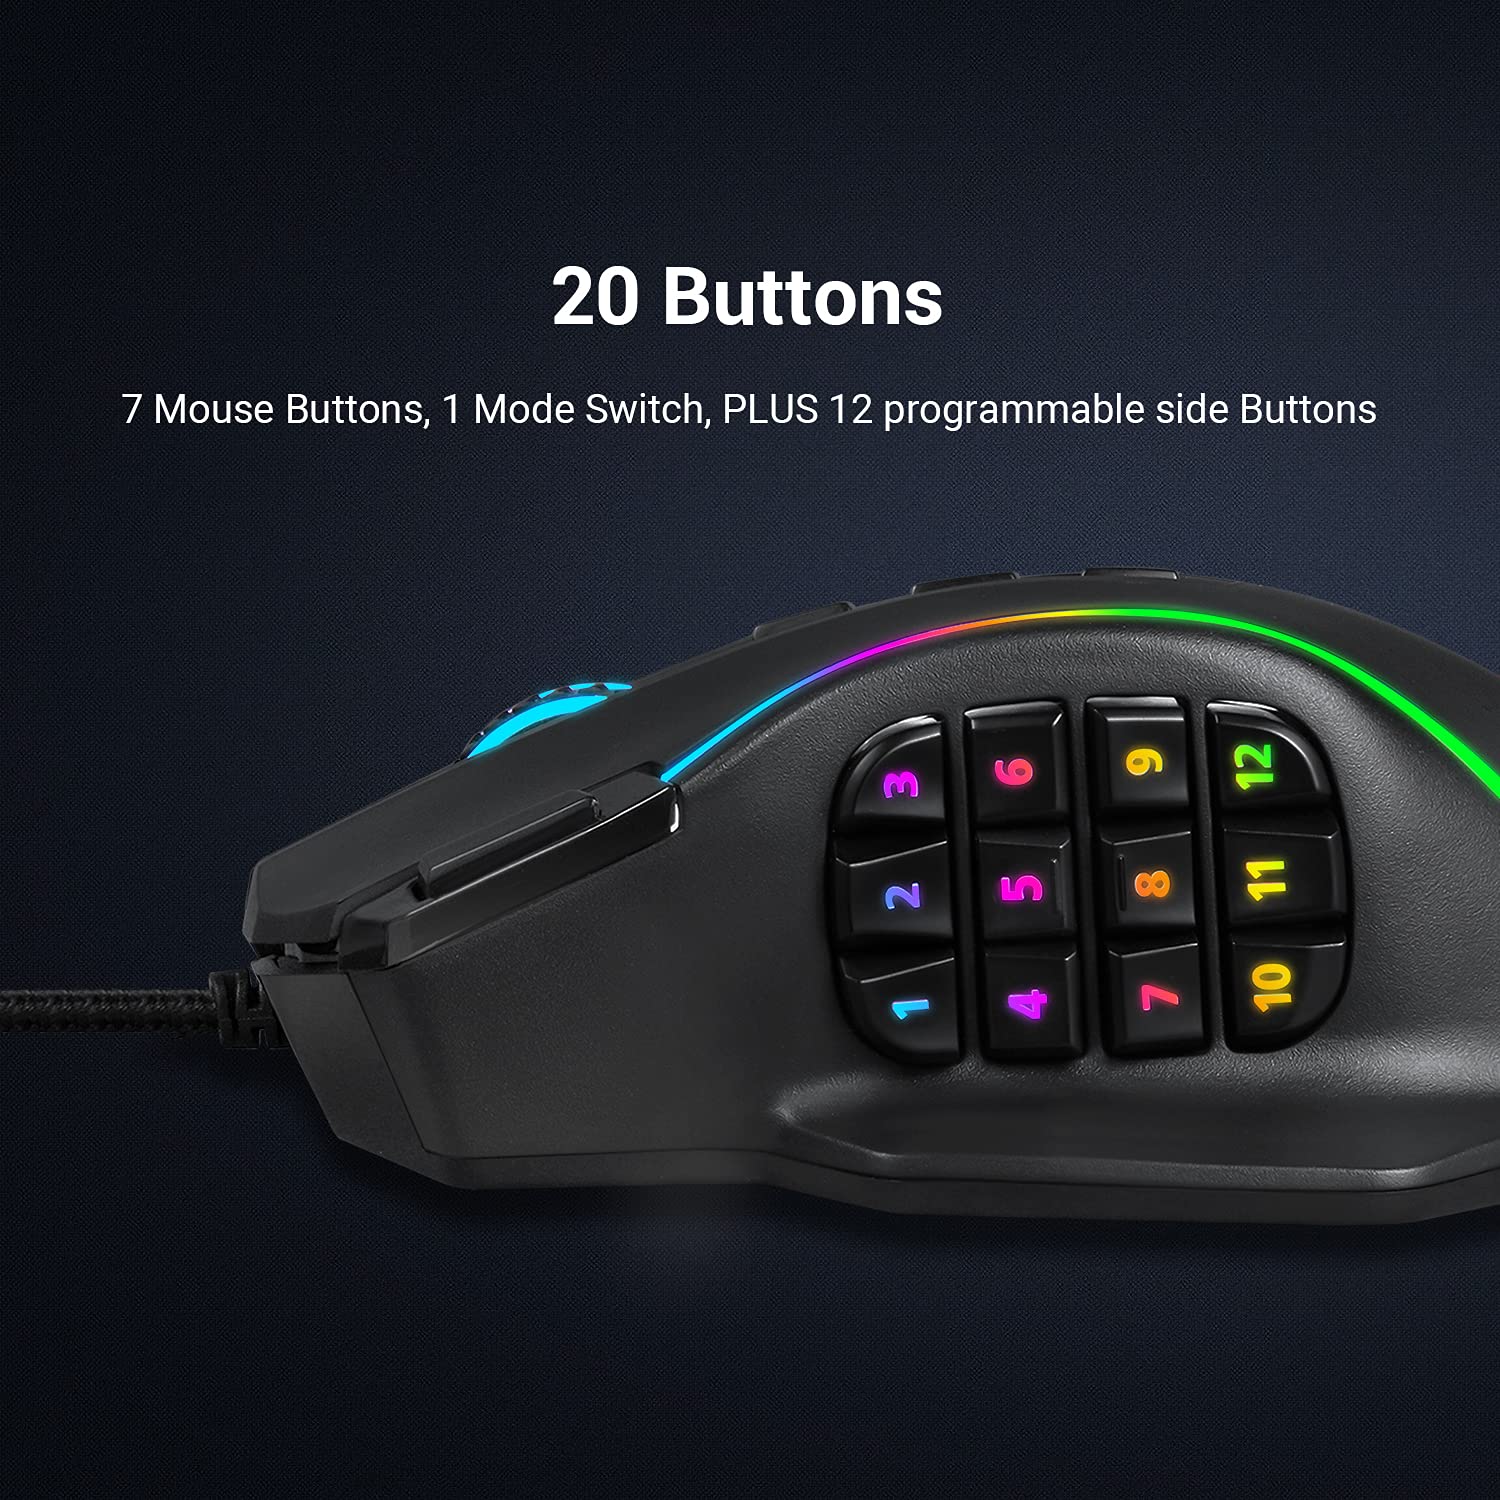 Redragon M901 Gaming Mouse RGB Backlit MMO 19 Macro Programmable Buttons with Weight Tuning Set, 12400 DPI for Windows PC Computer (Wired, Black)